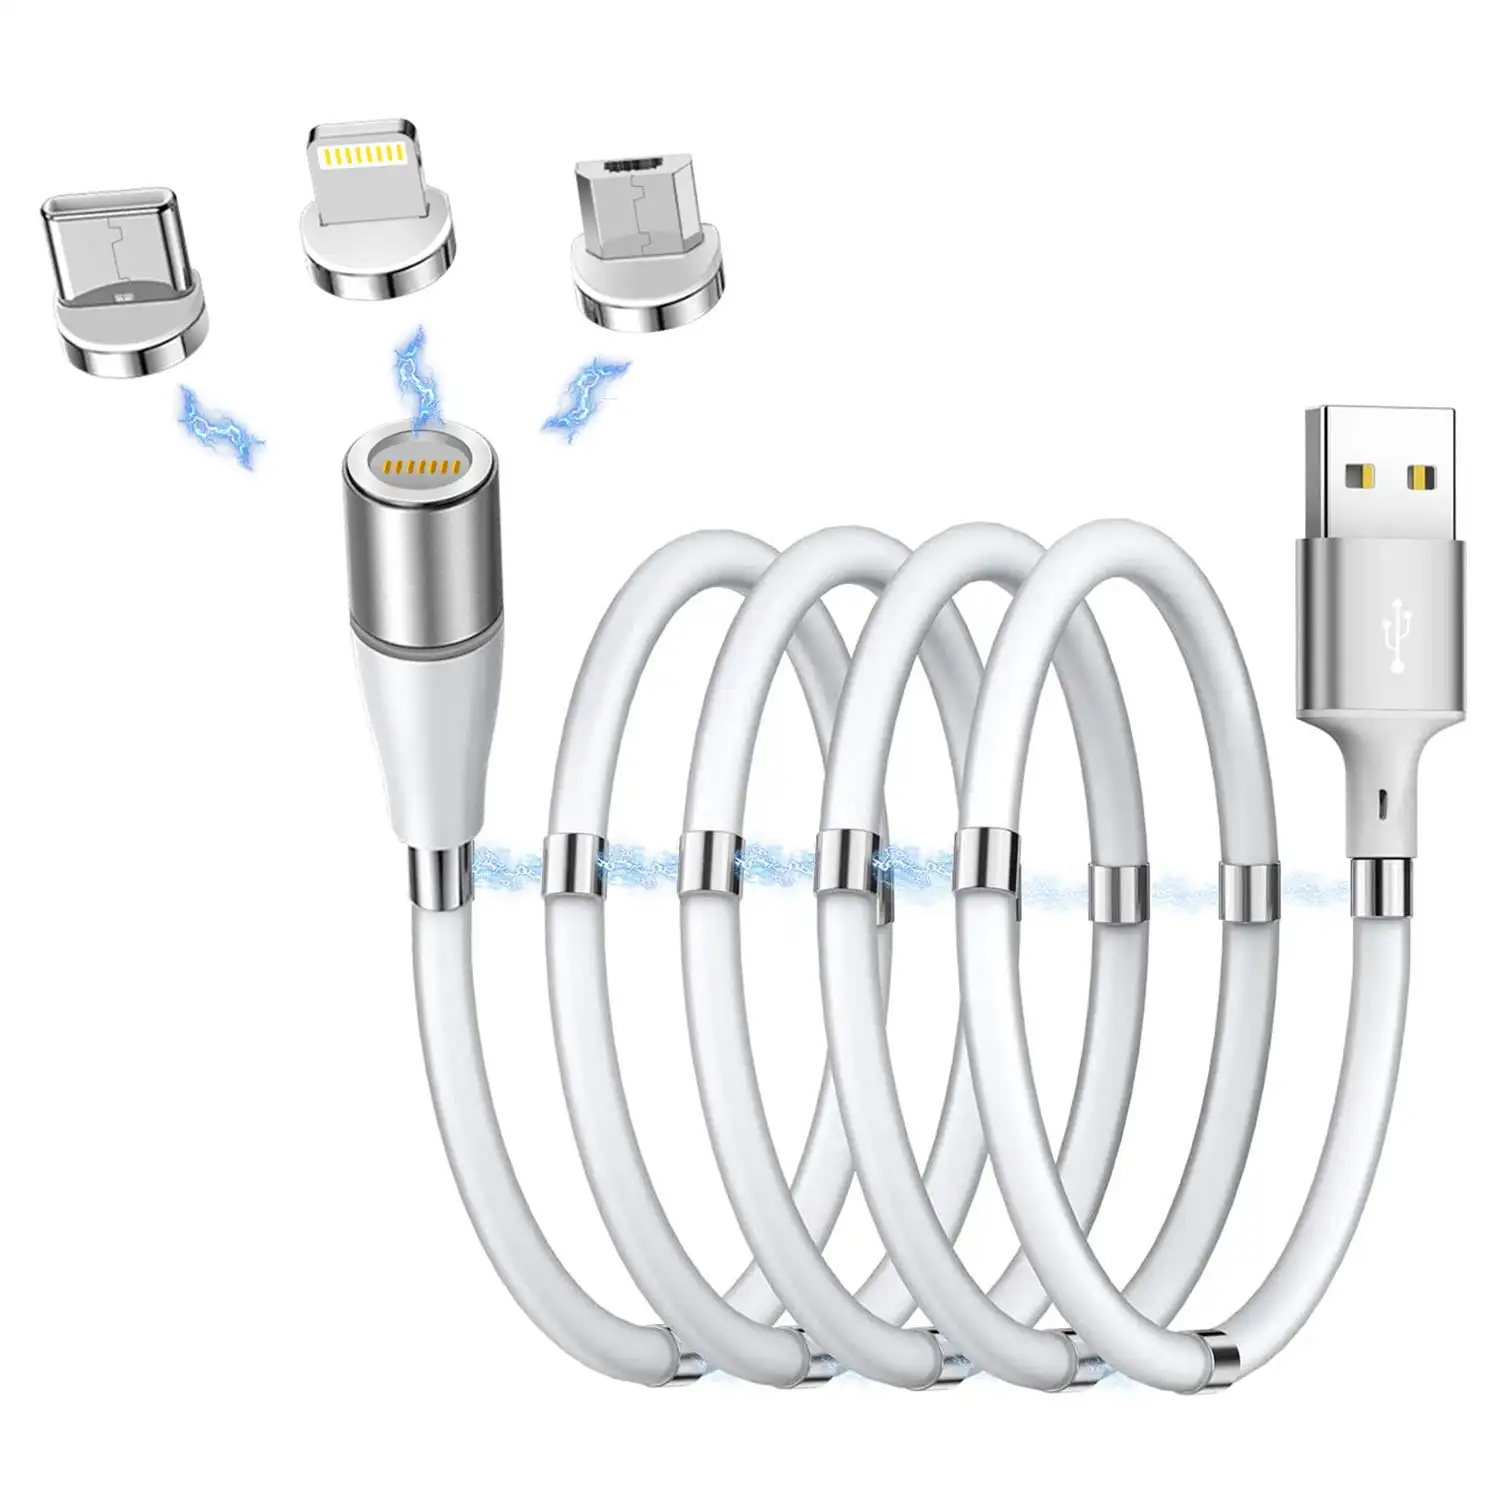 Linea de datos 2022 NEW OEM High Quality 3 in 1 Self Winding Cable Magnetic Charging Cable Retractable Fast Charging Cable